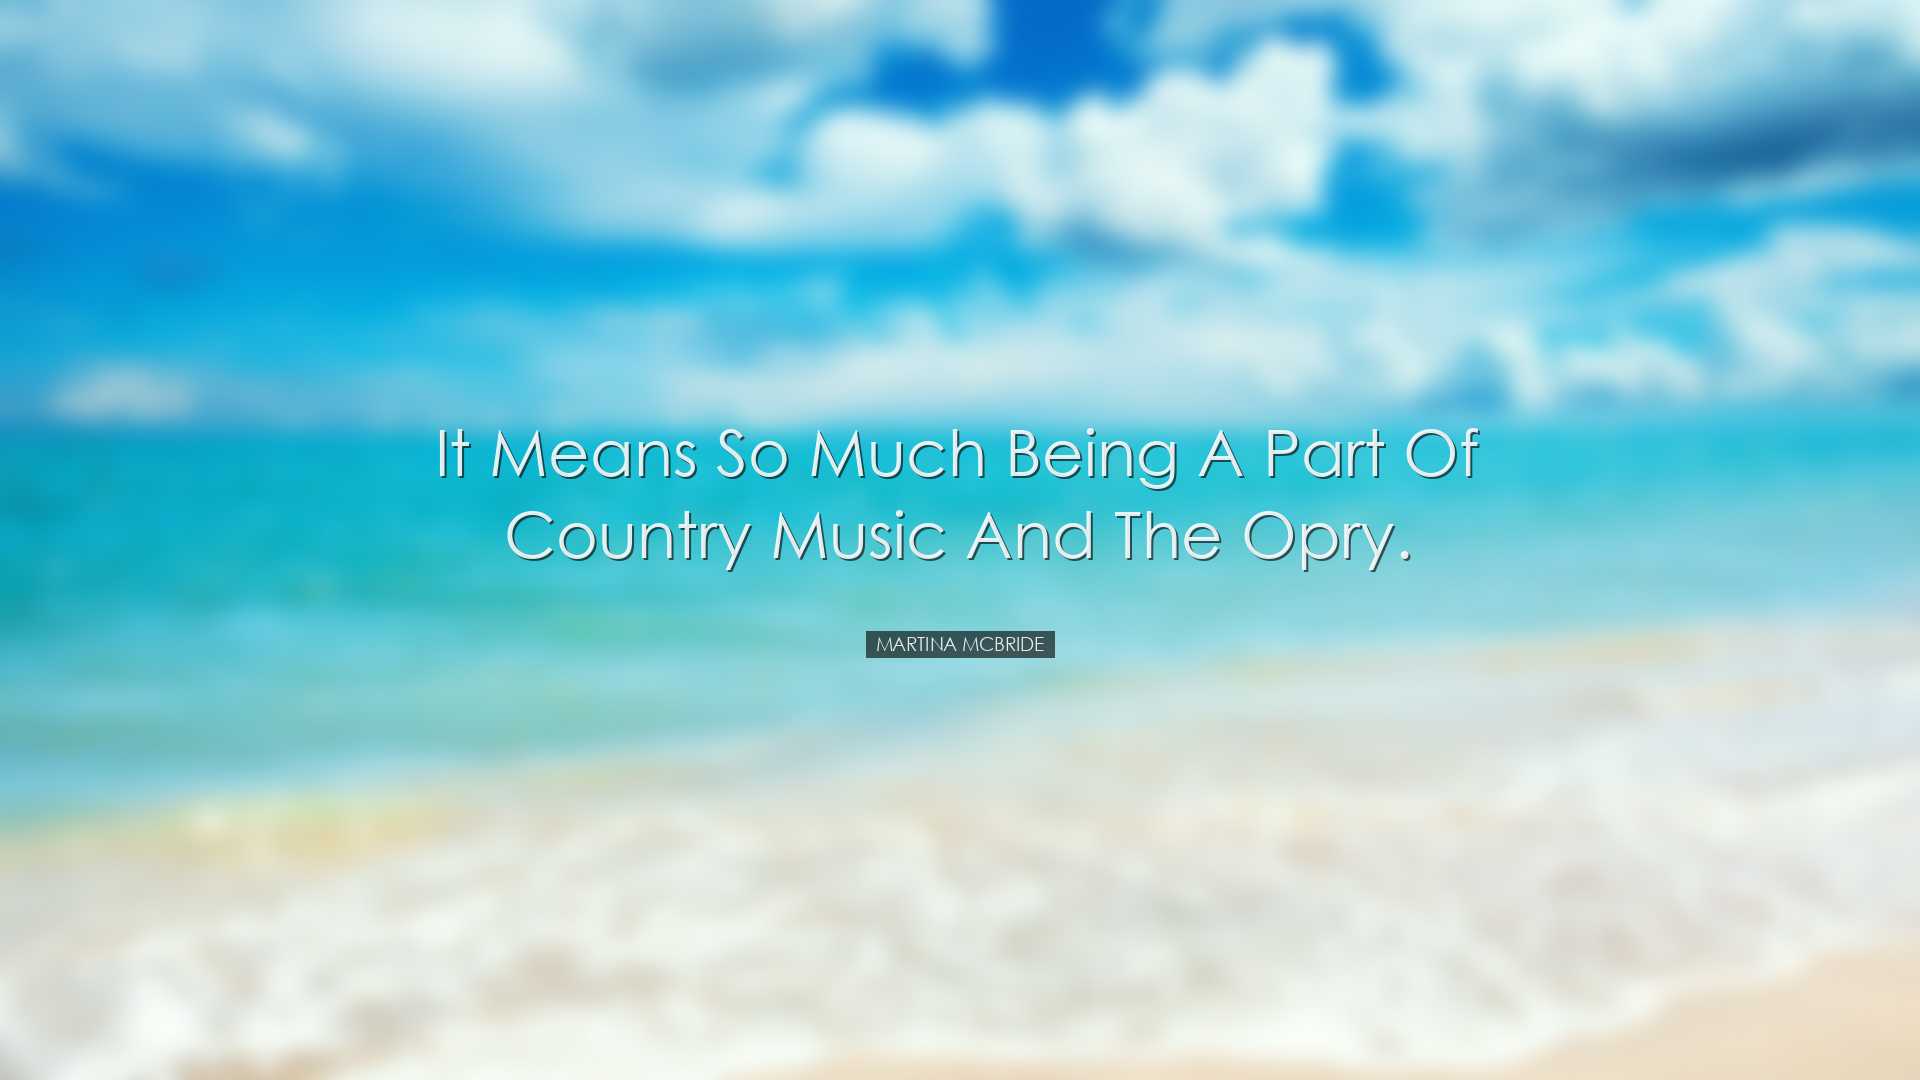 It means so much being a part of country music and the Opry. - Mar